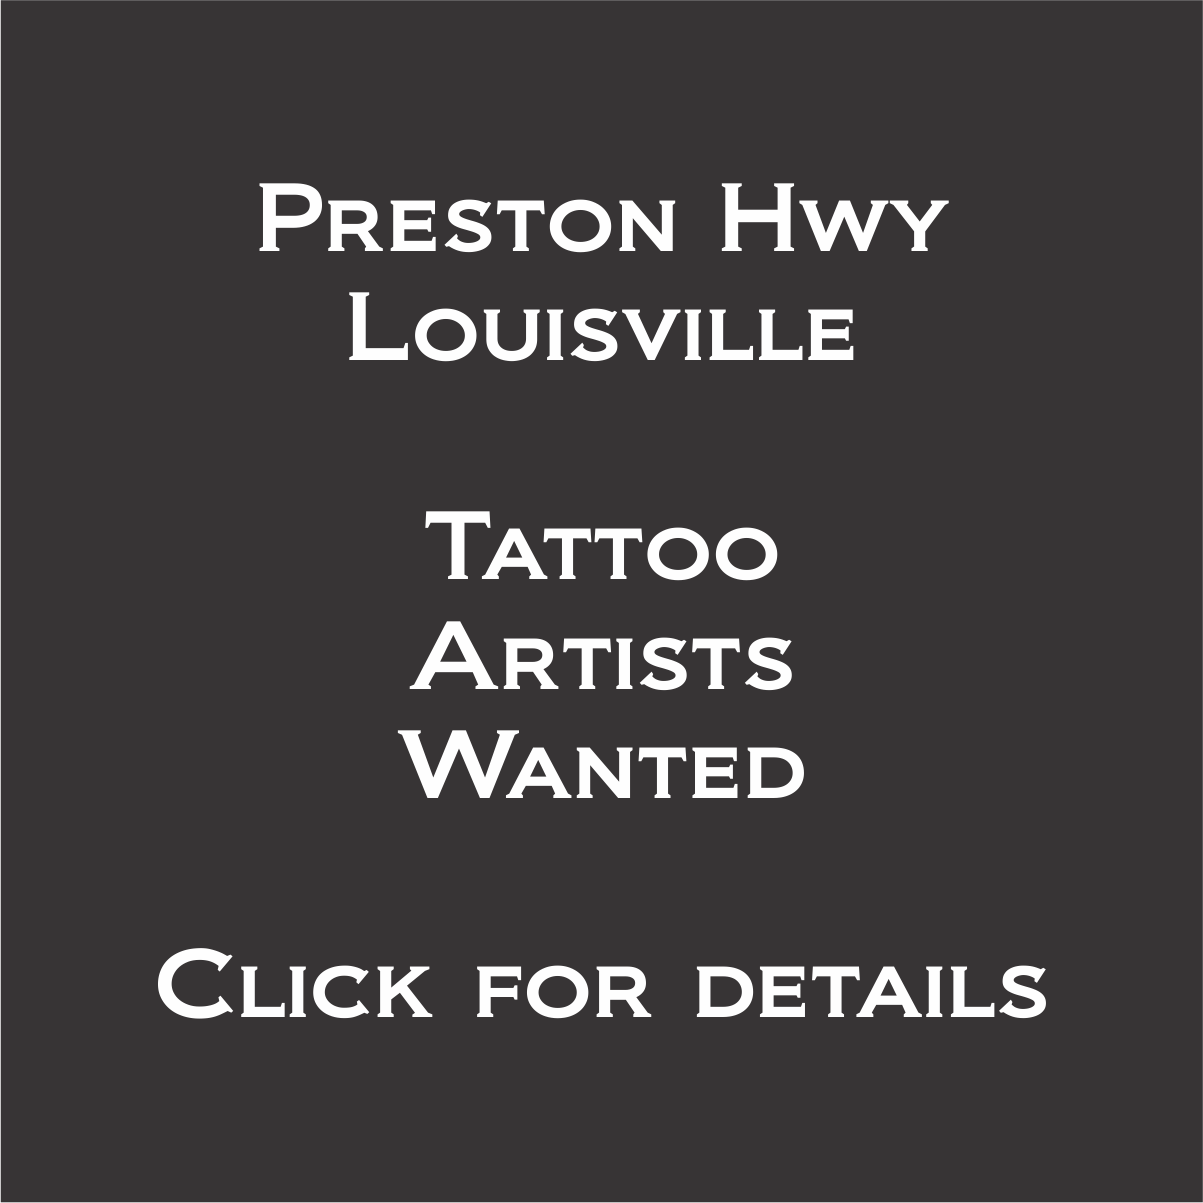 Serenity Ink Tattoos  𝗡𝗢𝗪 𝗛𝗜𝗥𝗜𝗡𝗚  We are looking for a new tattoo  artist that can tattoo anything  Must have a strong portfolio a minimum  of three years of experience